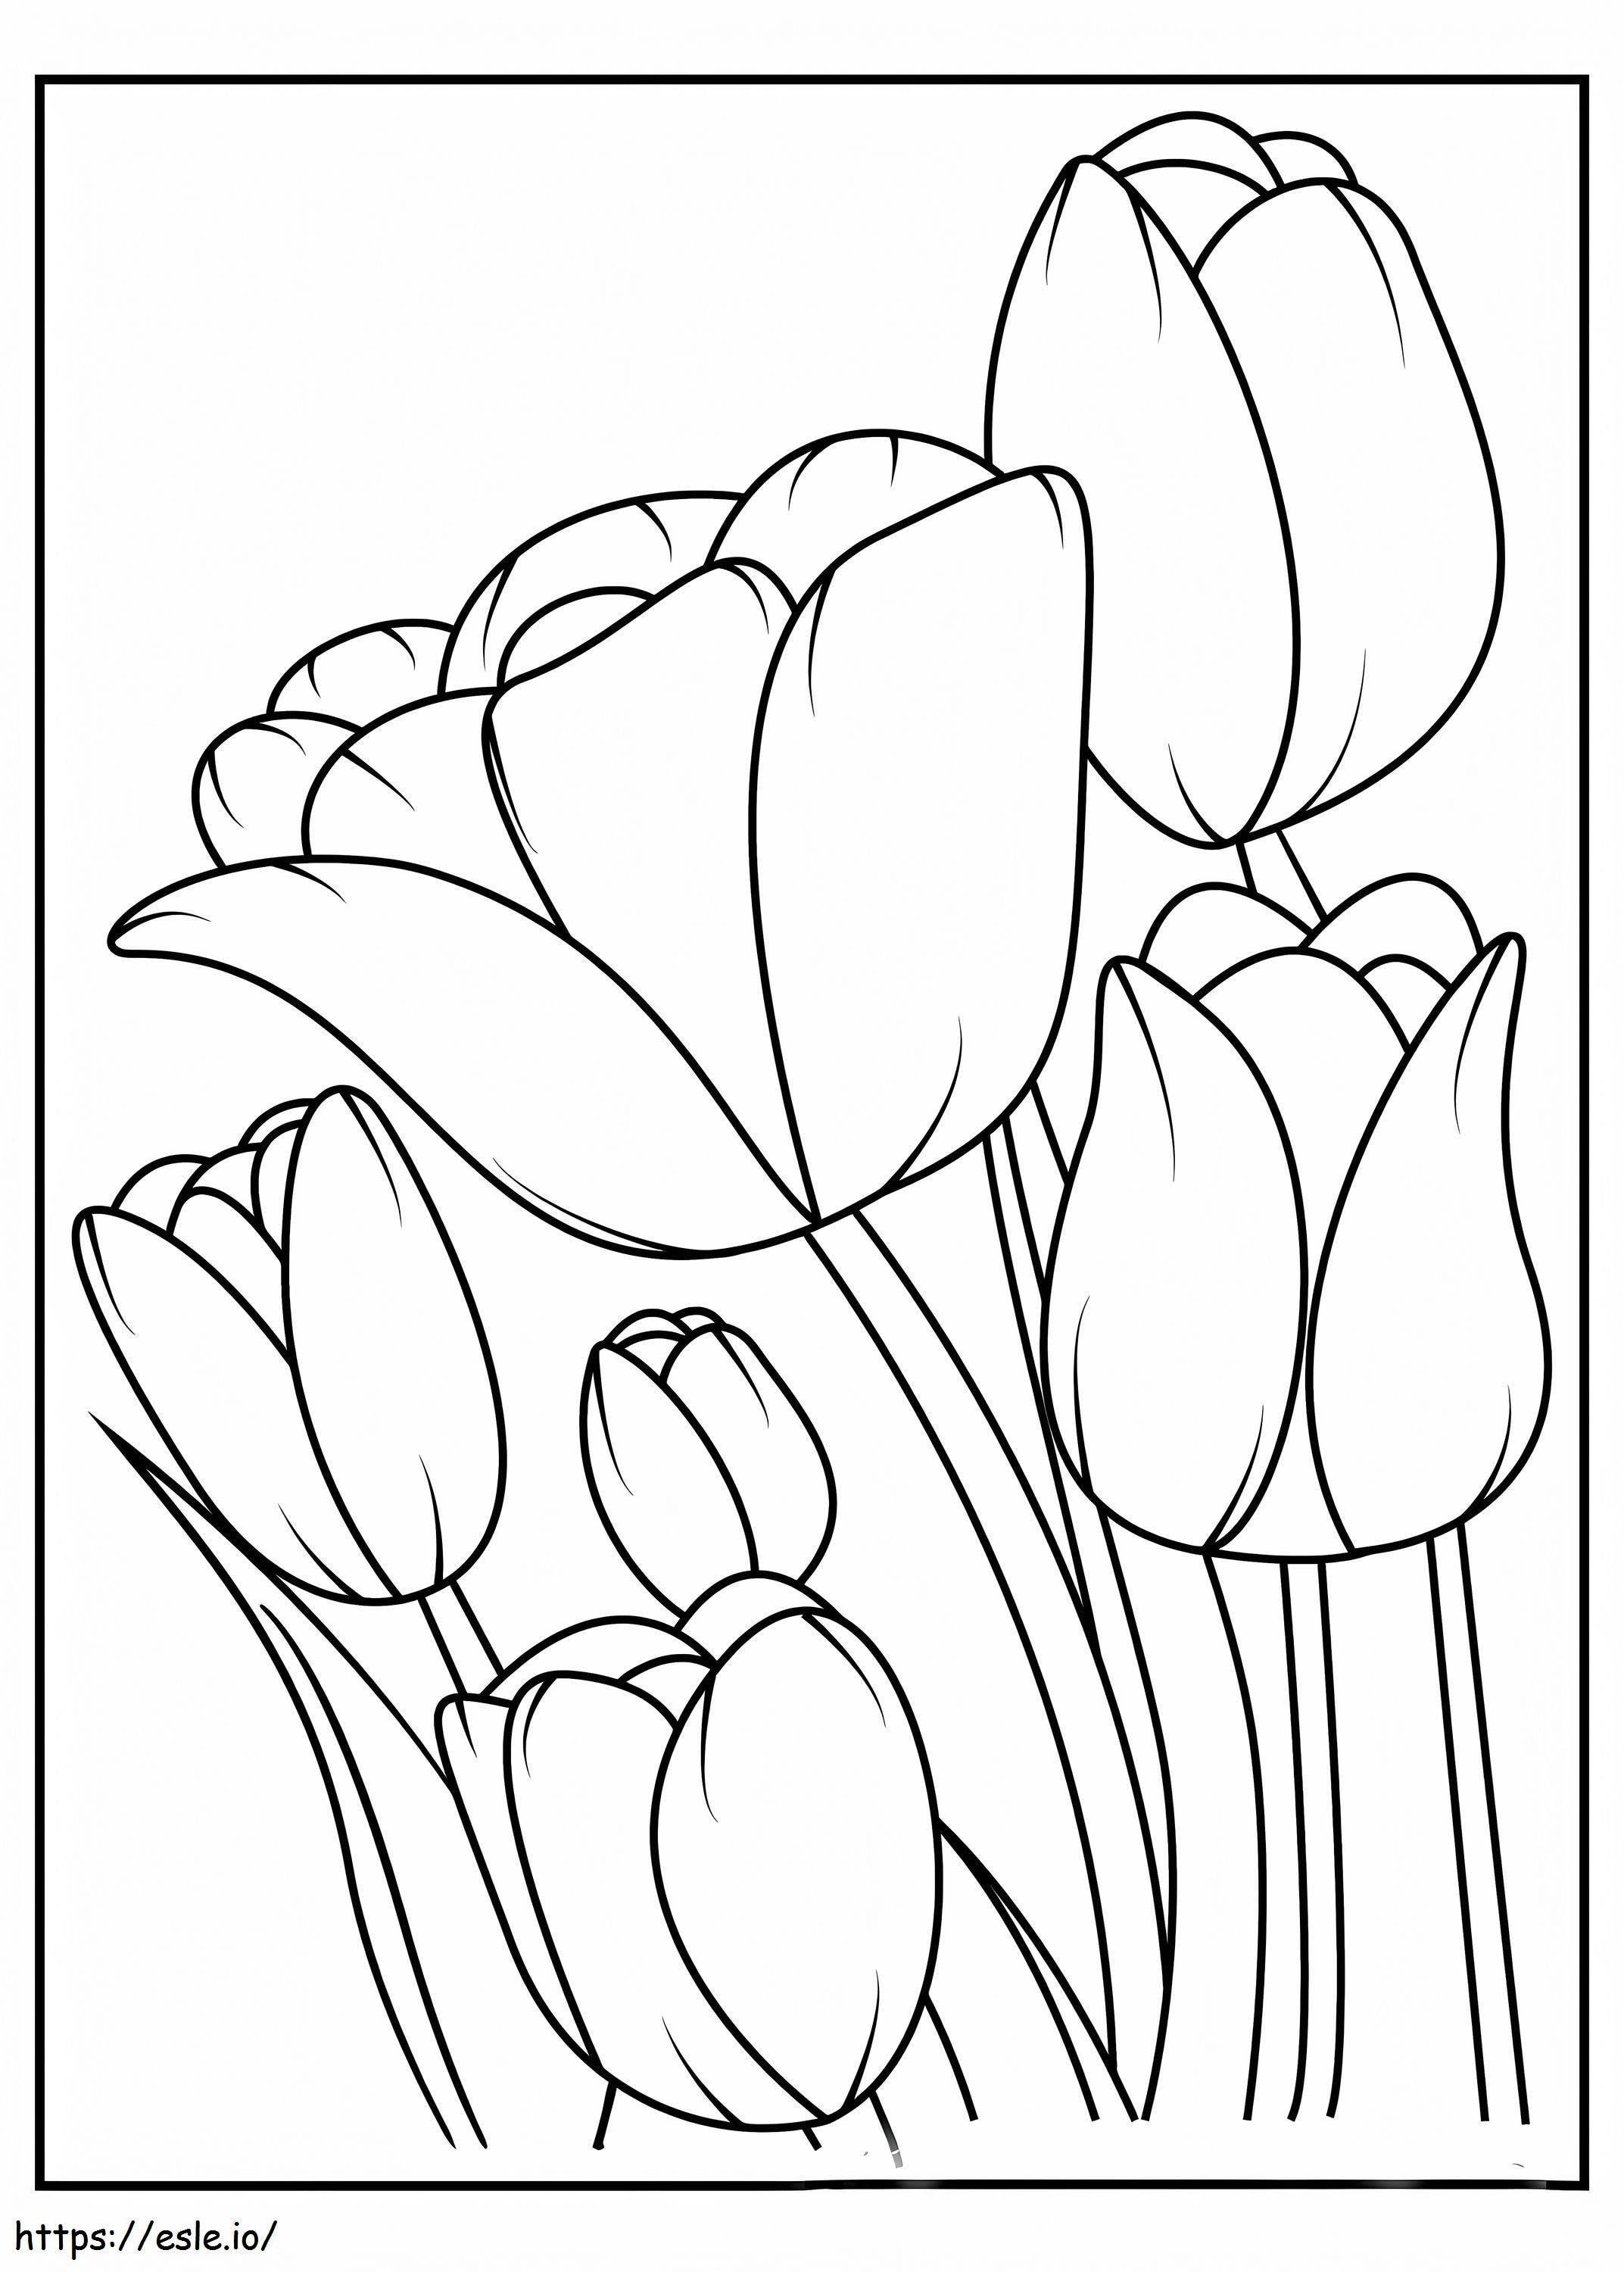 Six Tulips coloring page